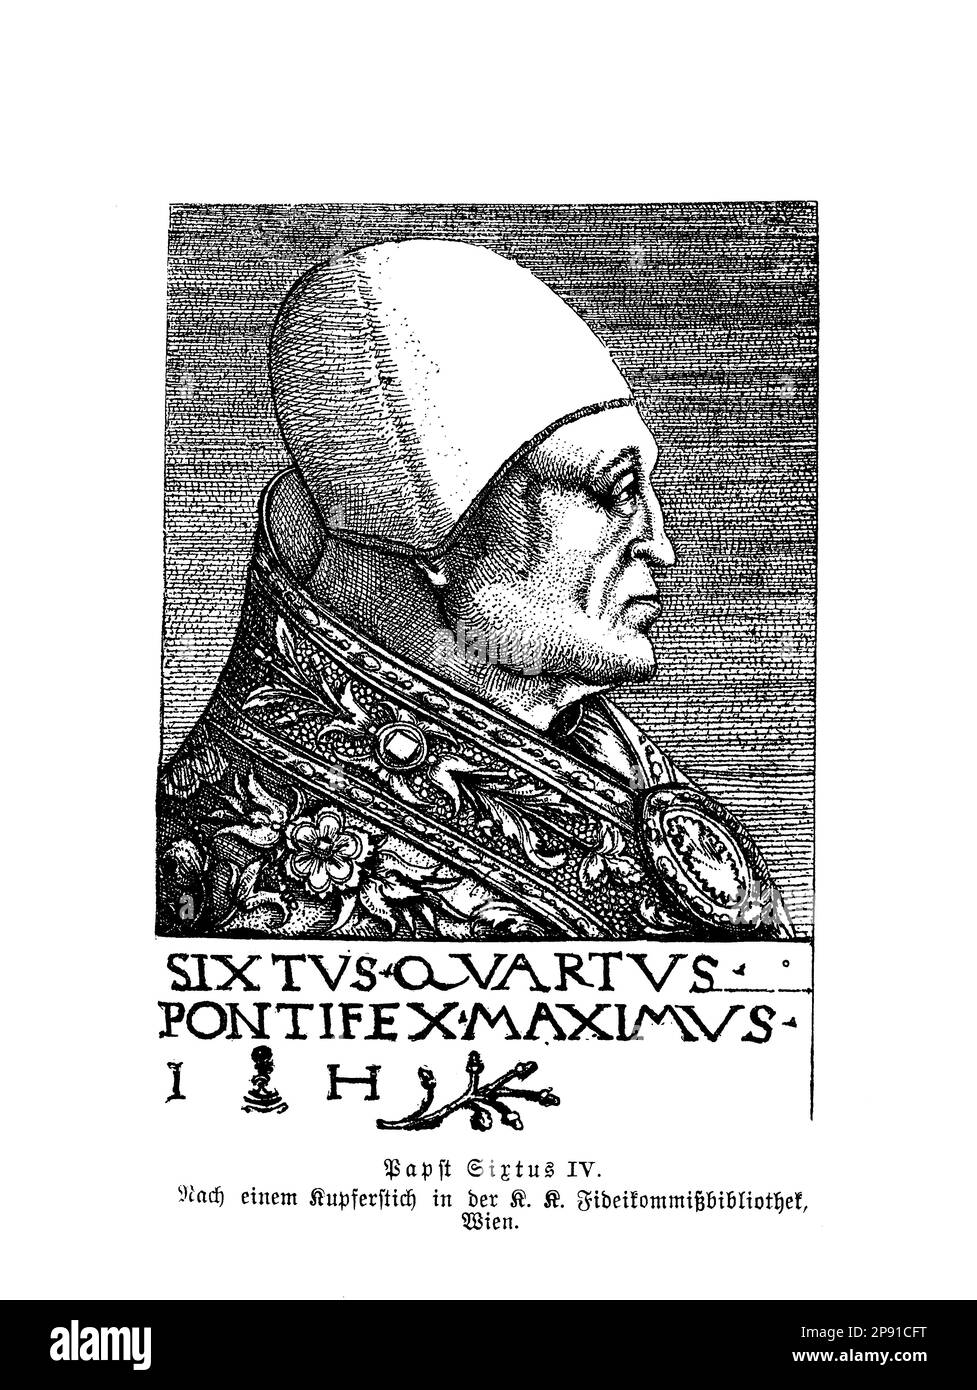 Pope Sixtus IV was the leader of the Catholic Church from 1471 to 1484. He commissioned the Sistine Chapel and was known for his patronage of the arts, but also for his political and military involvement Stock Photo